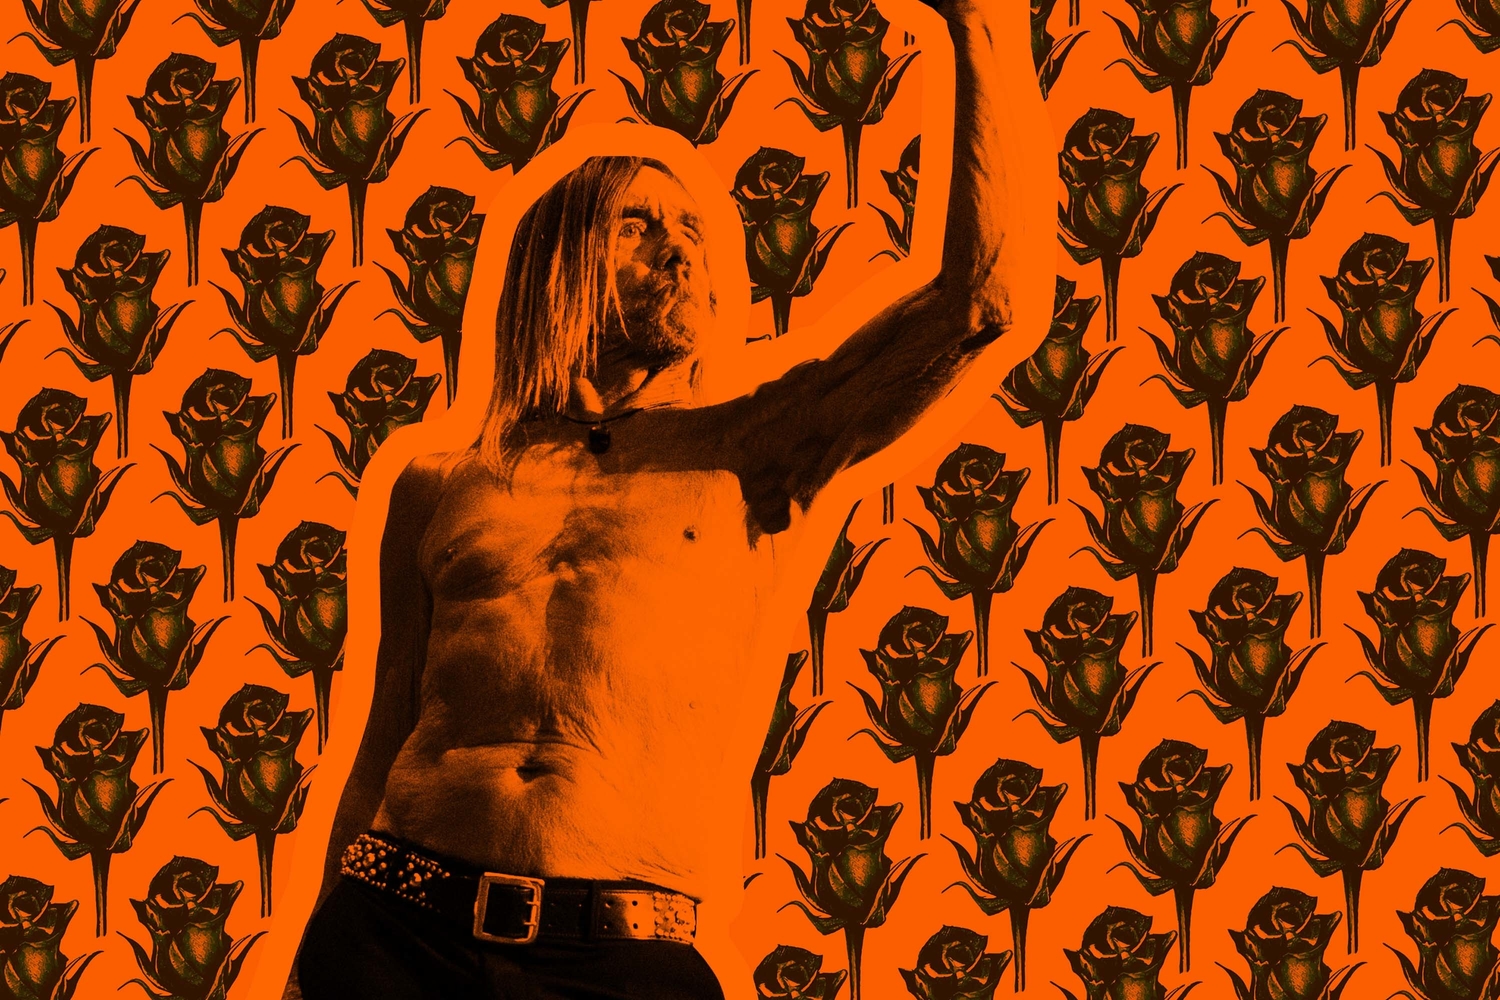 Iggy Pop: "I was out to kill bears right from the beginning..."